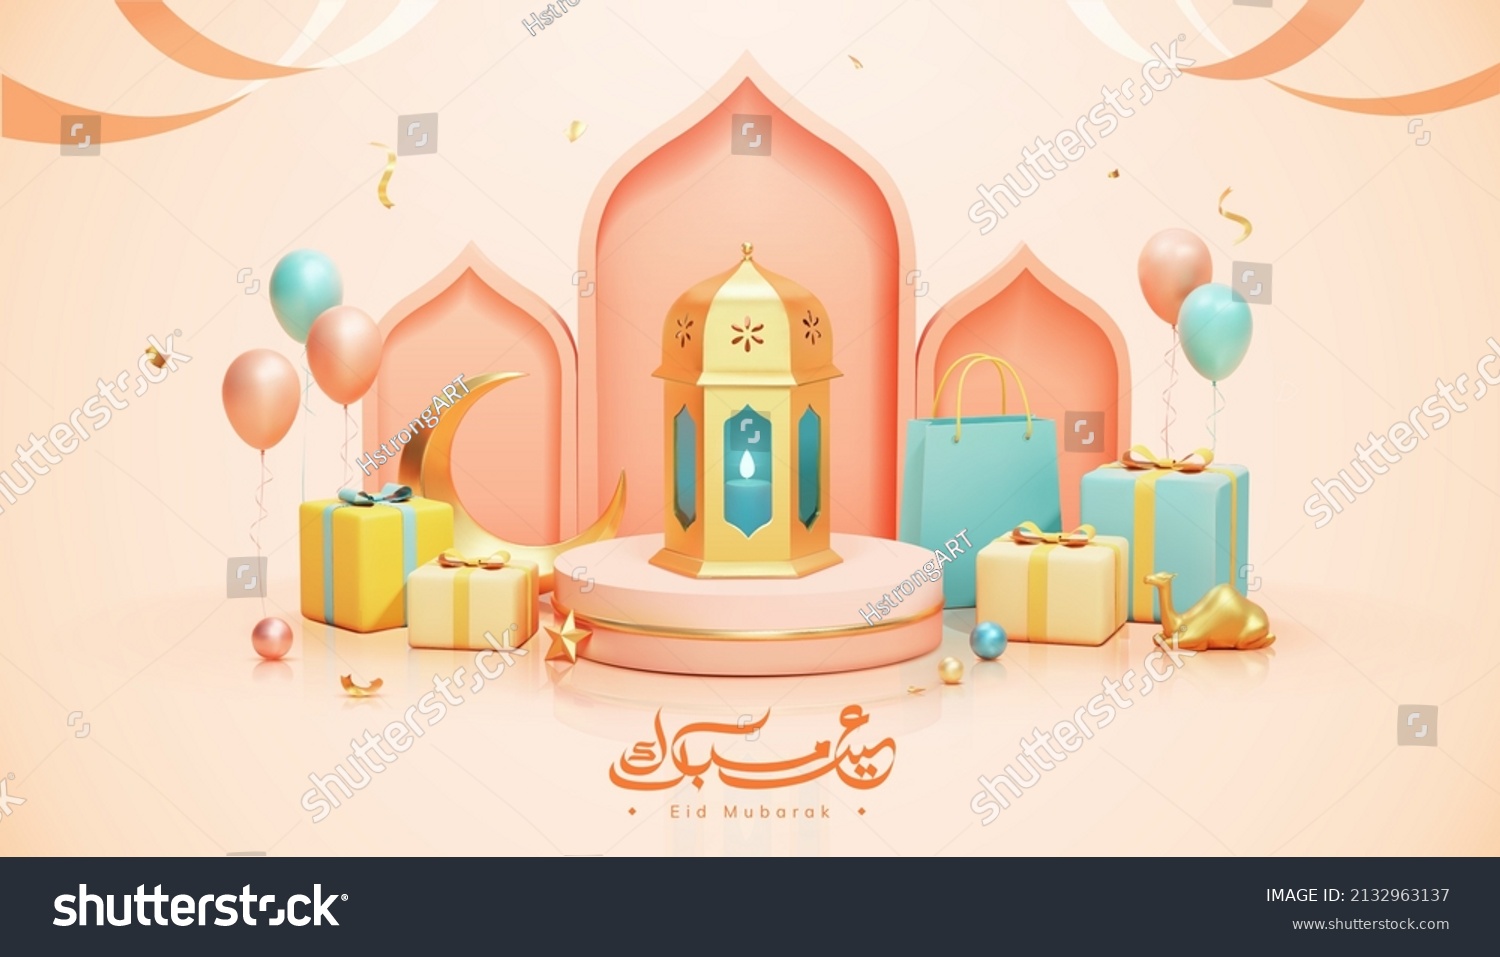 SVG of 3d pastel Islamic scene background design. Fanoos lantern displayed on podium with arch door frame, gift boxes and balloons. svg